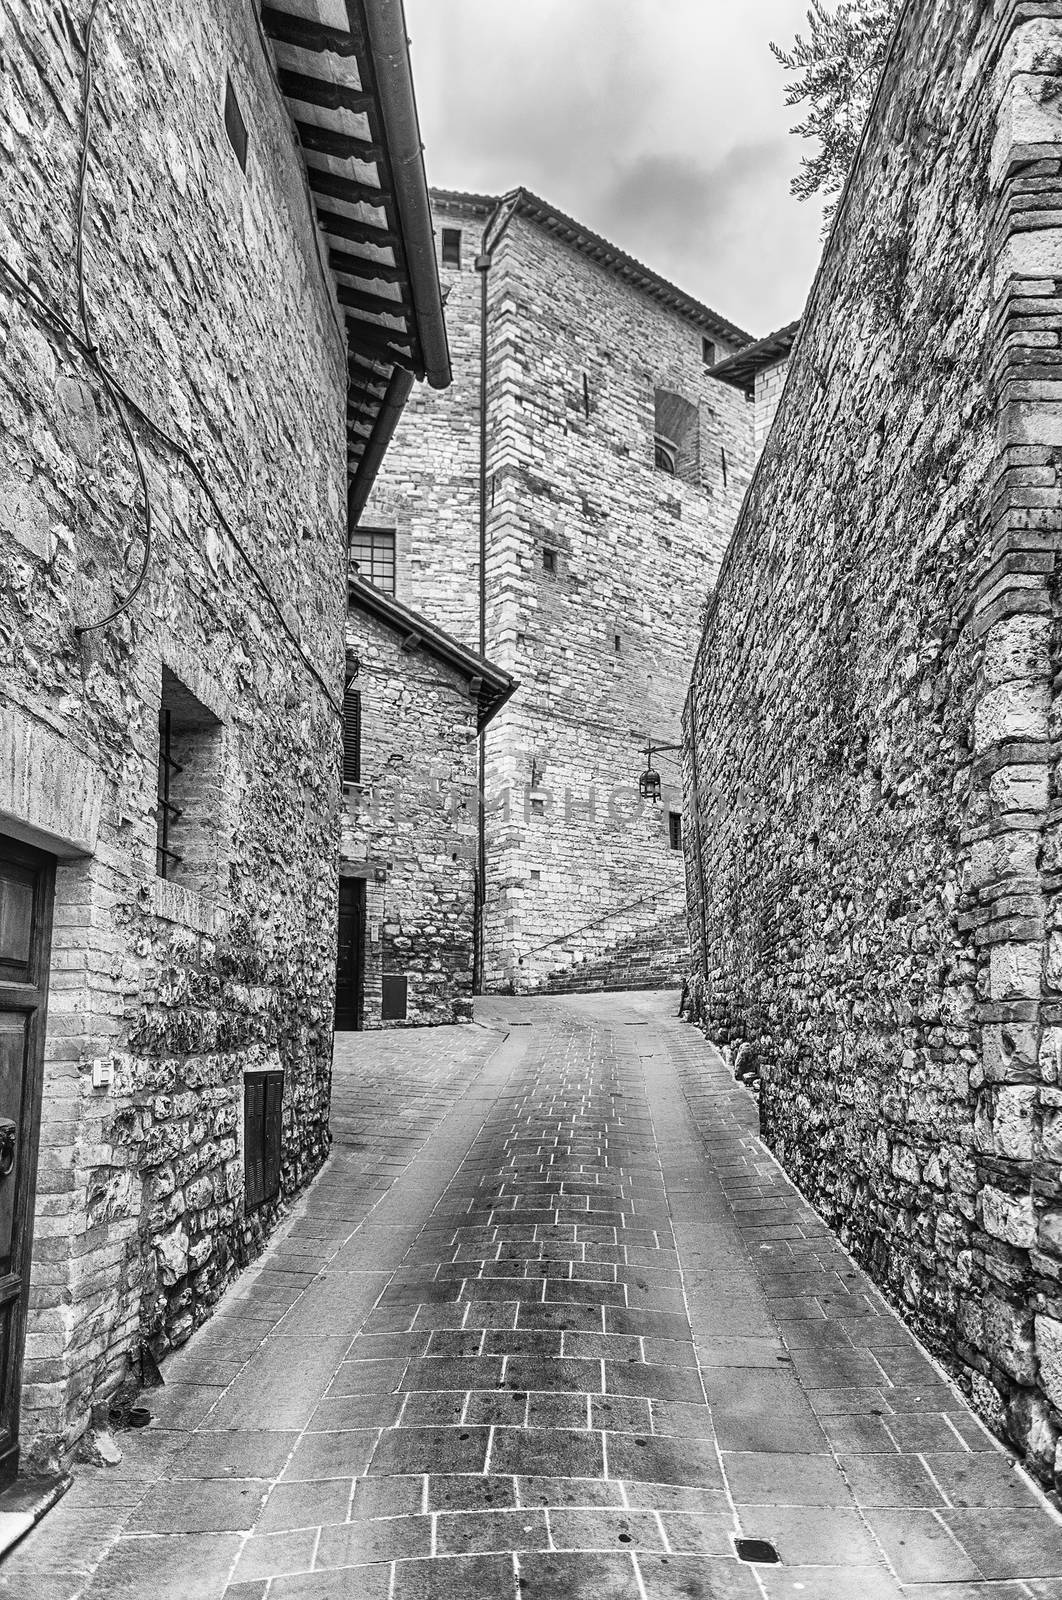 Scenic streets of the medieval town of Assisi, Umbria, Italy by marcorubino